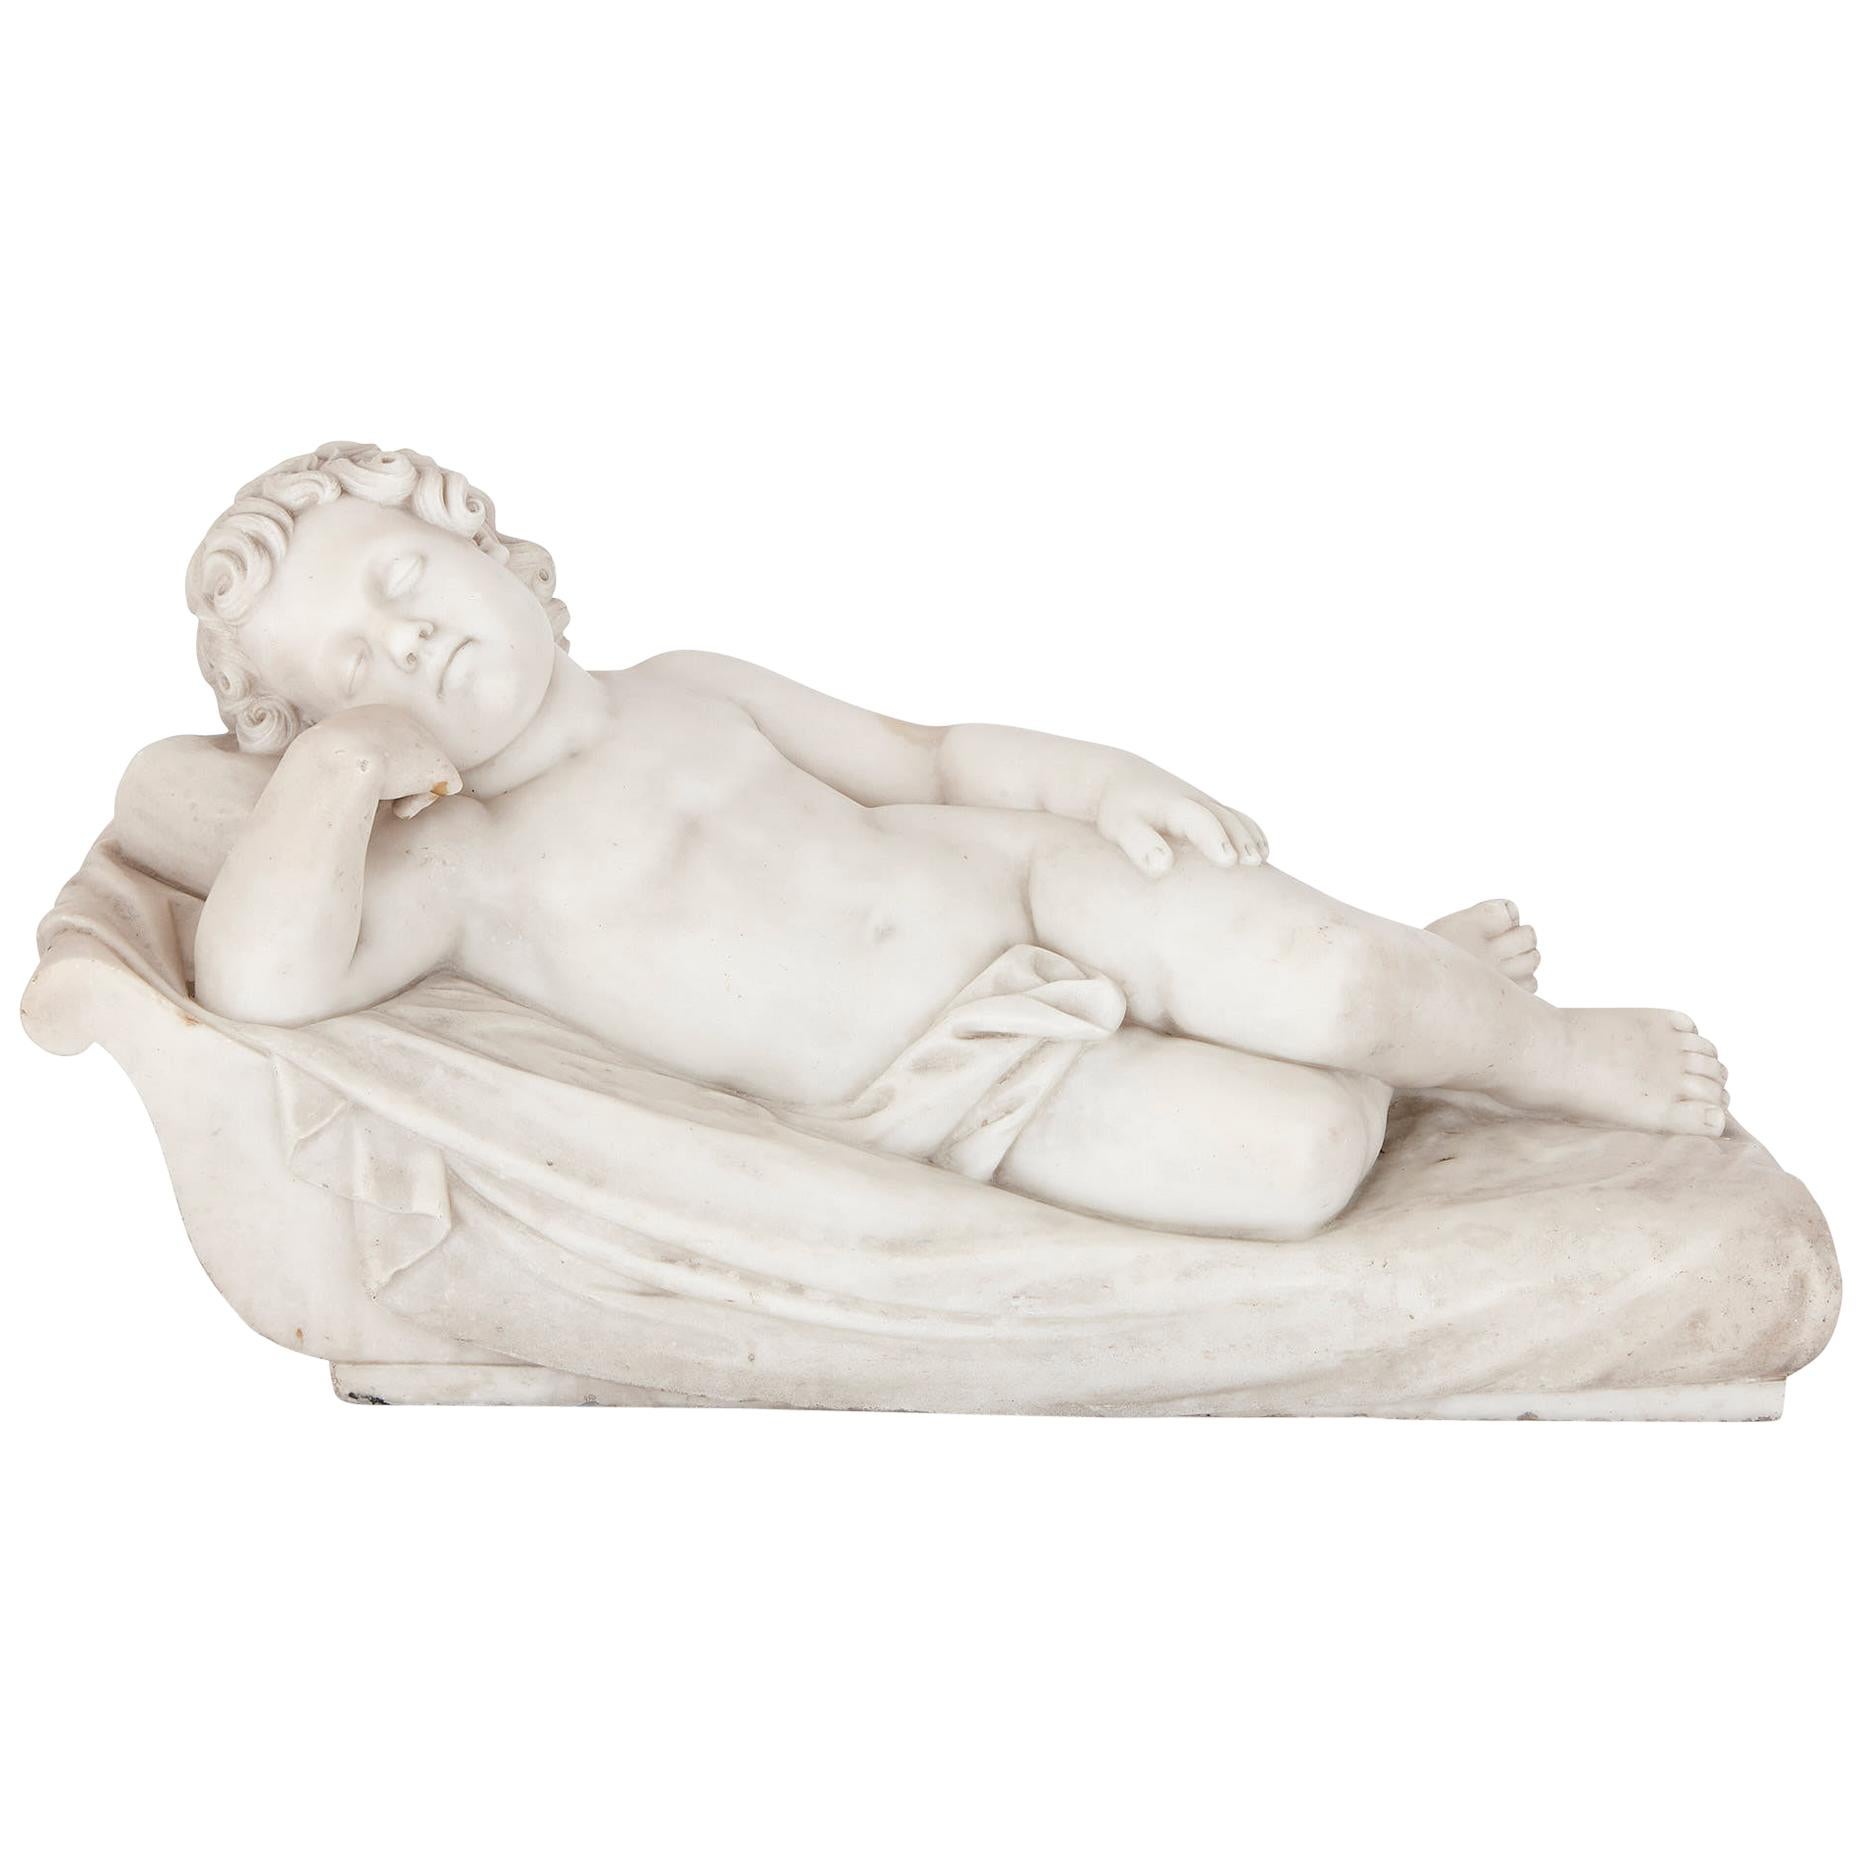 Renaissance Style Marble Figure of Sleeping Child For Sale